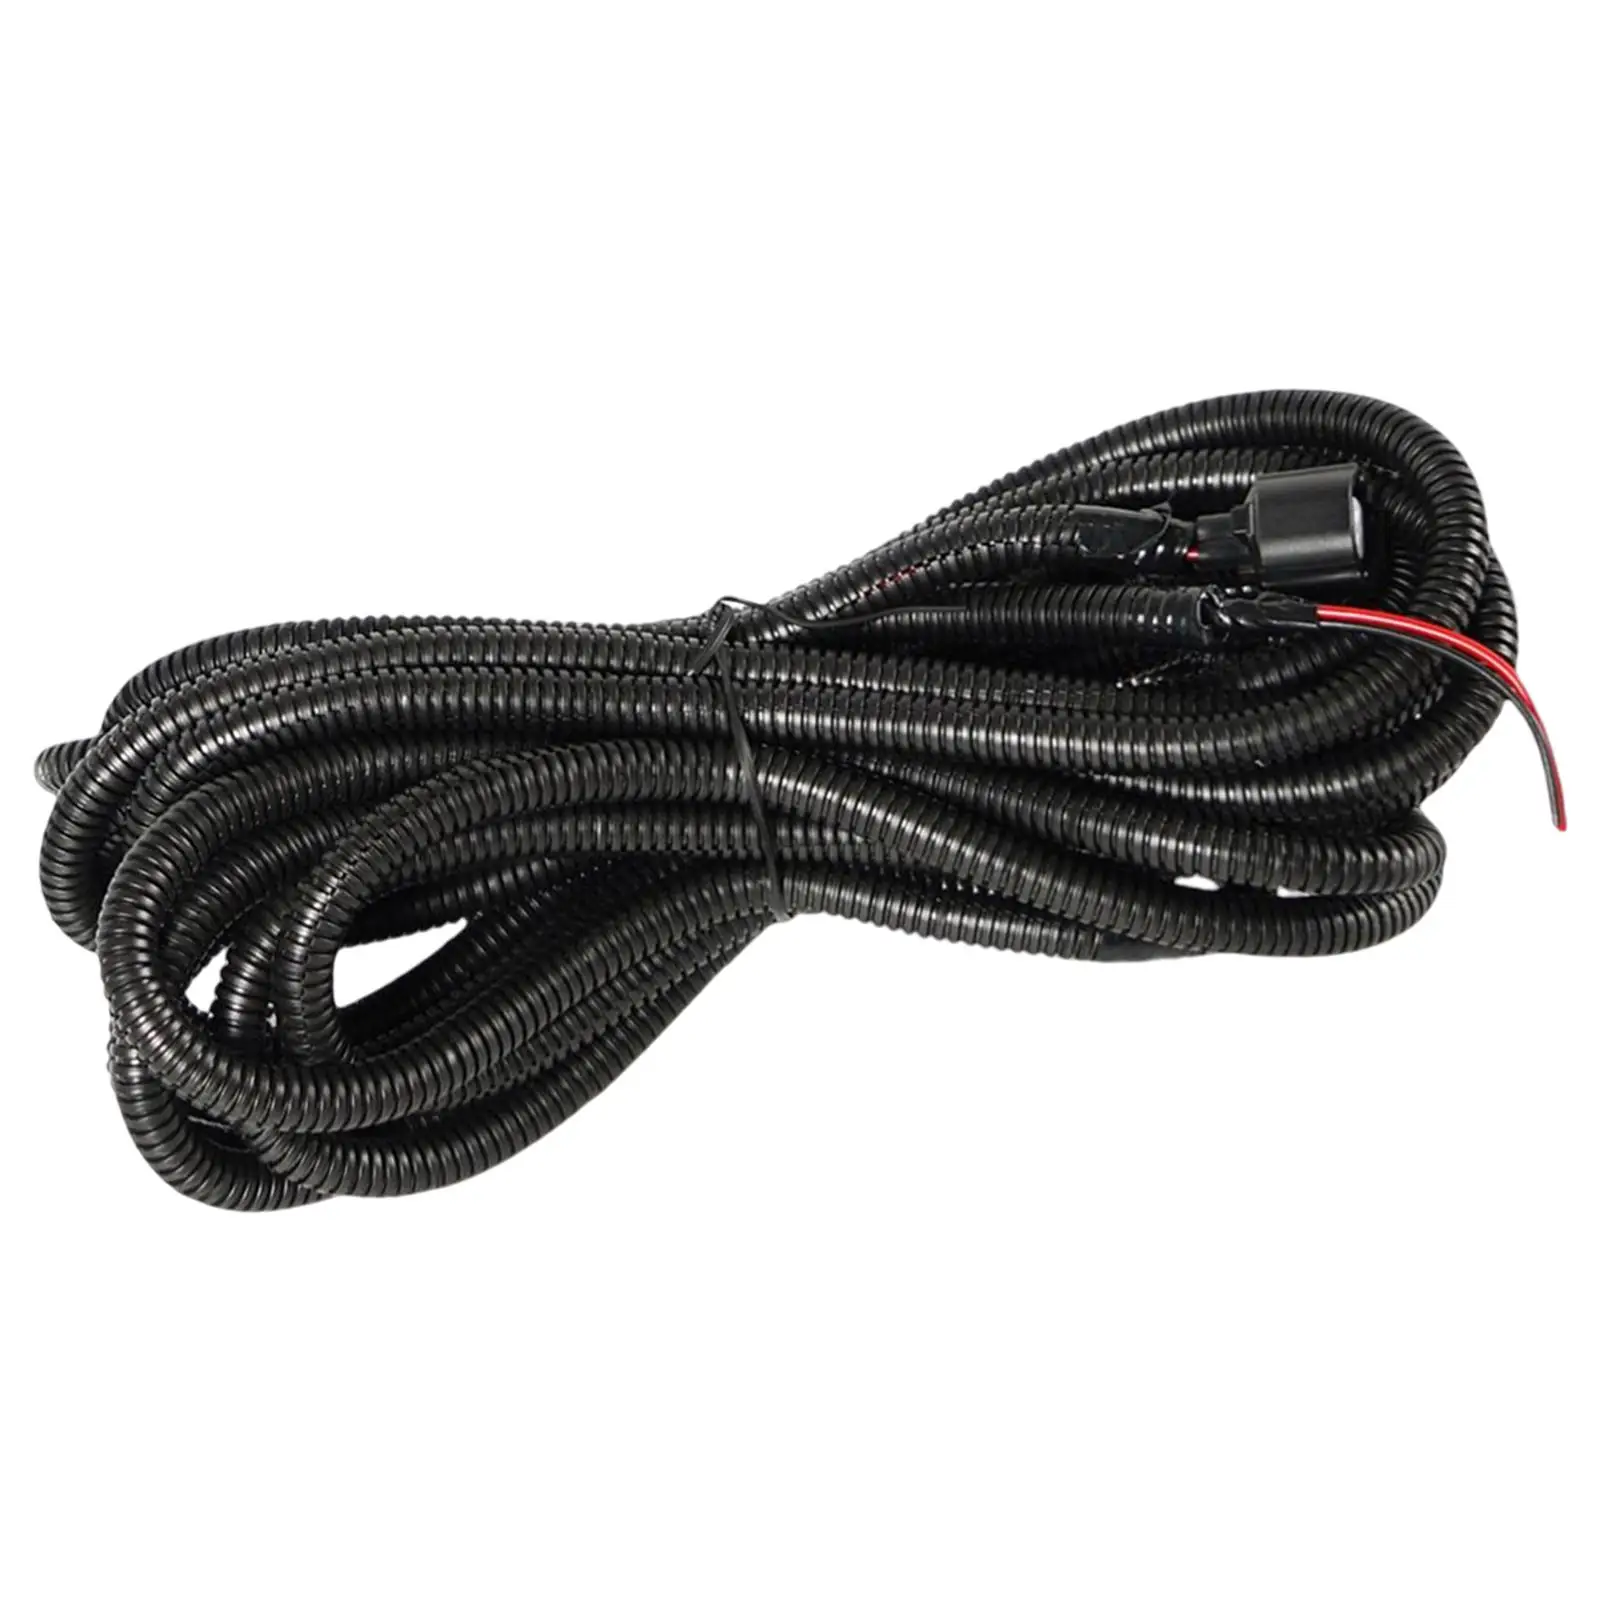 6m Car Electric Locker Connect Wiring Harness P5155359 Insulating Surface 12V for Wrangler JK Jku 44 Auto Parts